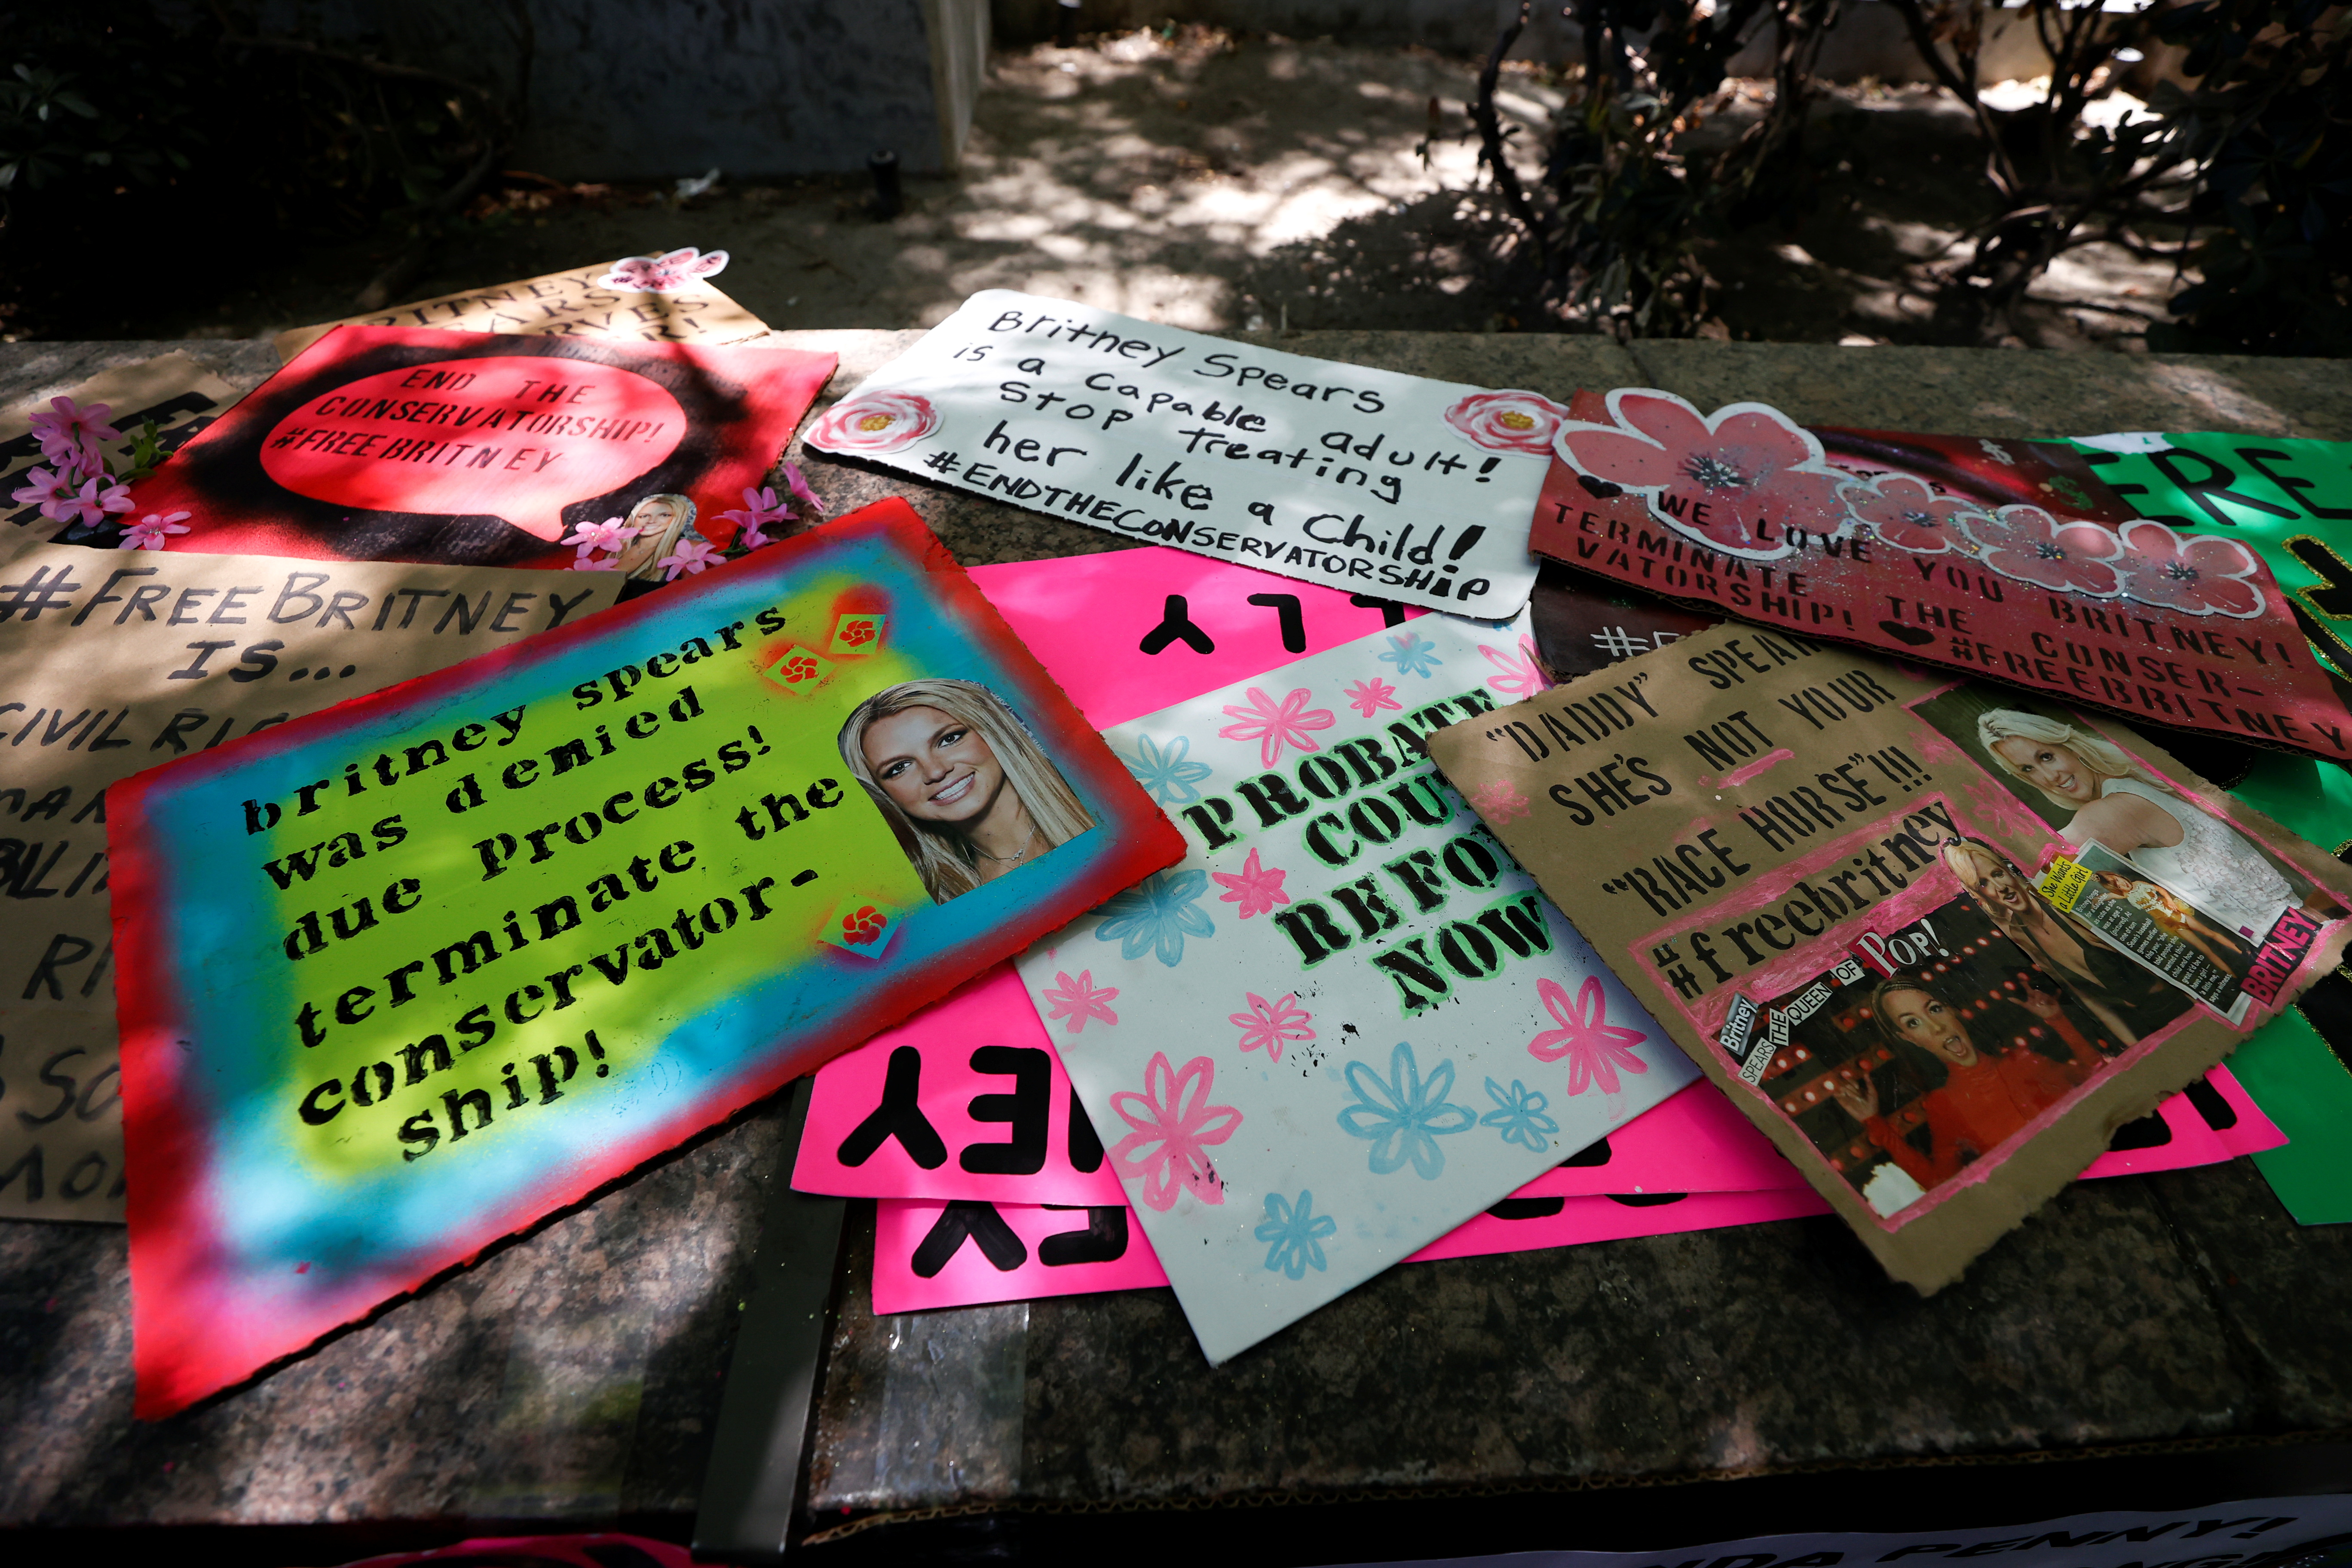 Placards are displayed during a protest in support of pop star Britney Spears on the day of a conservatorship case hearing at Stanley Mosk Courthouse in Los Angeles, California, U.S. June 23, 2021. REUTERS/Mario Anzuoni